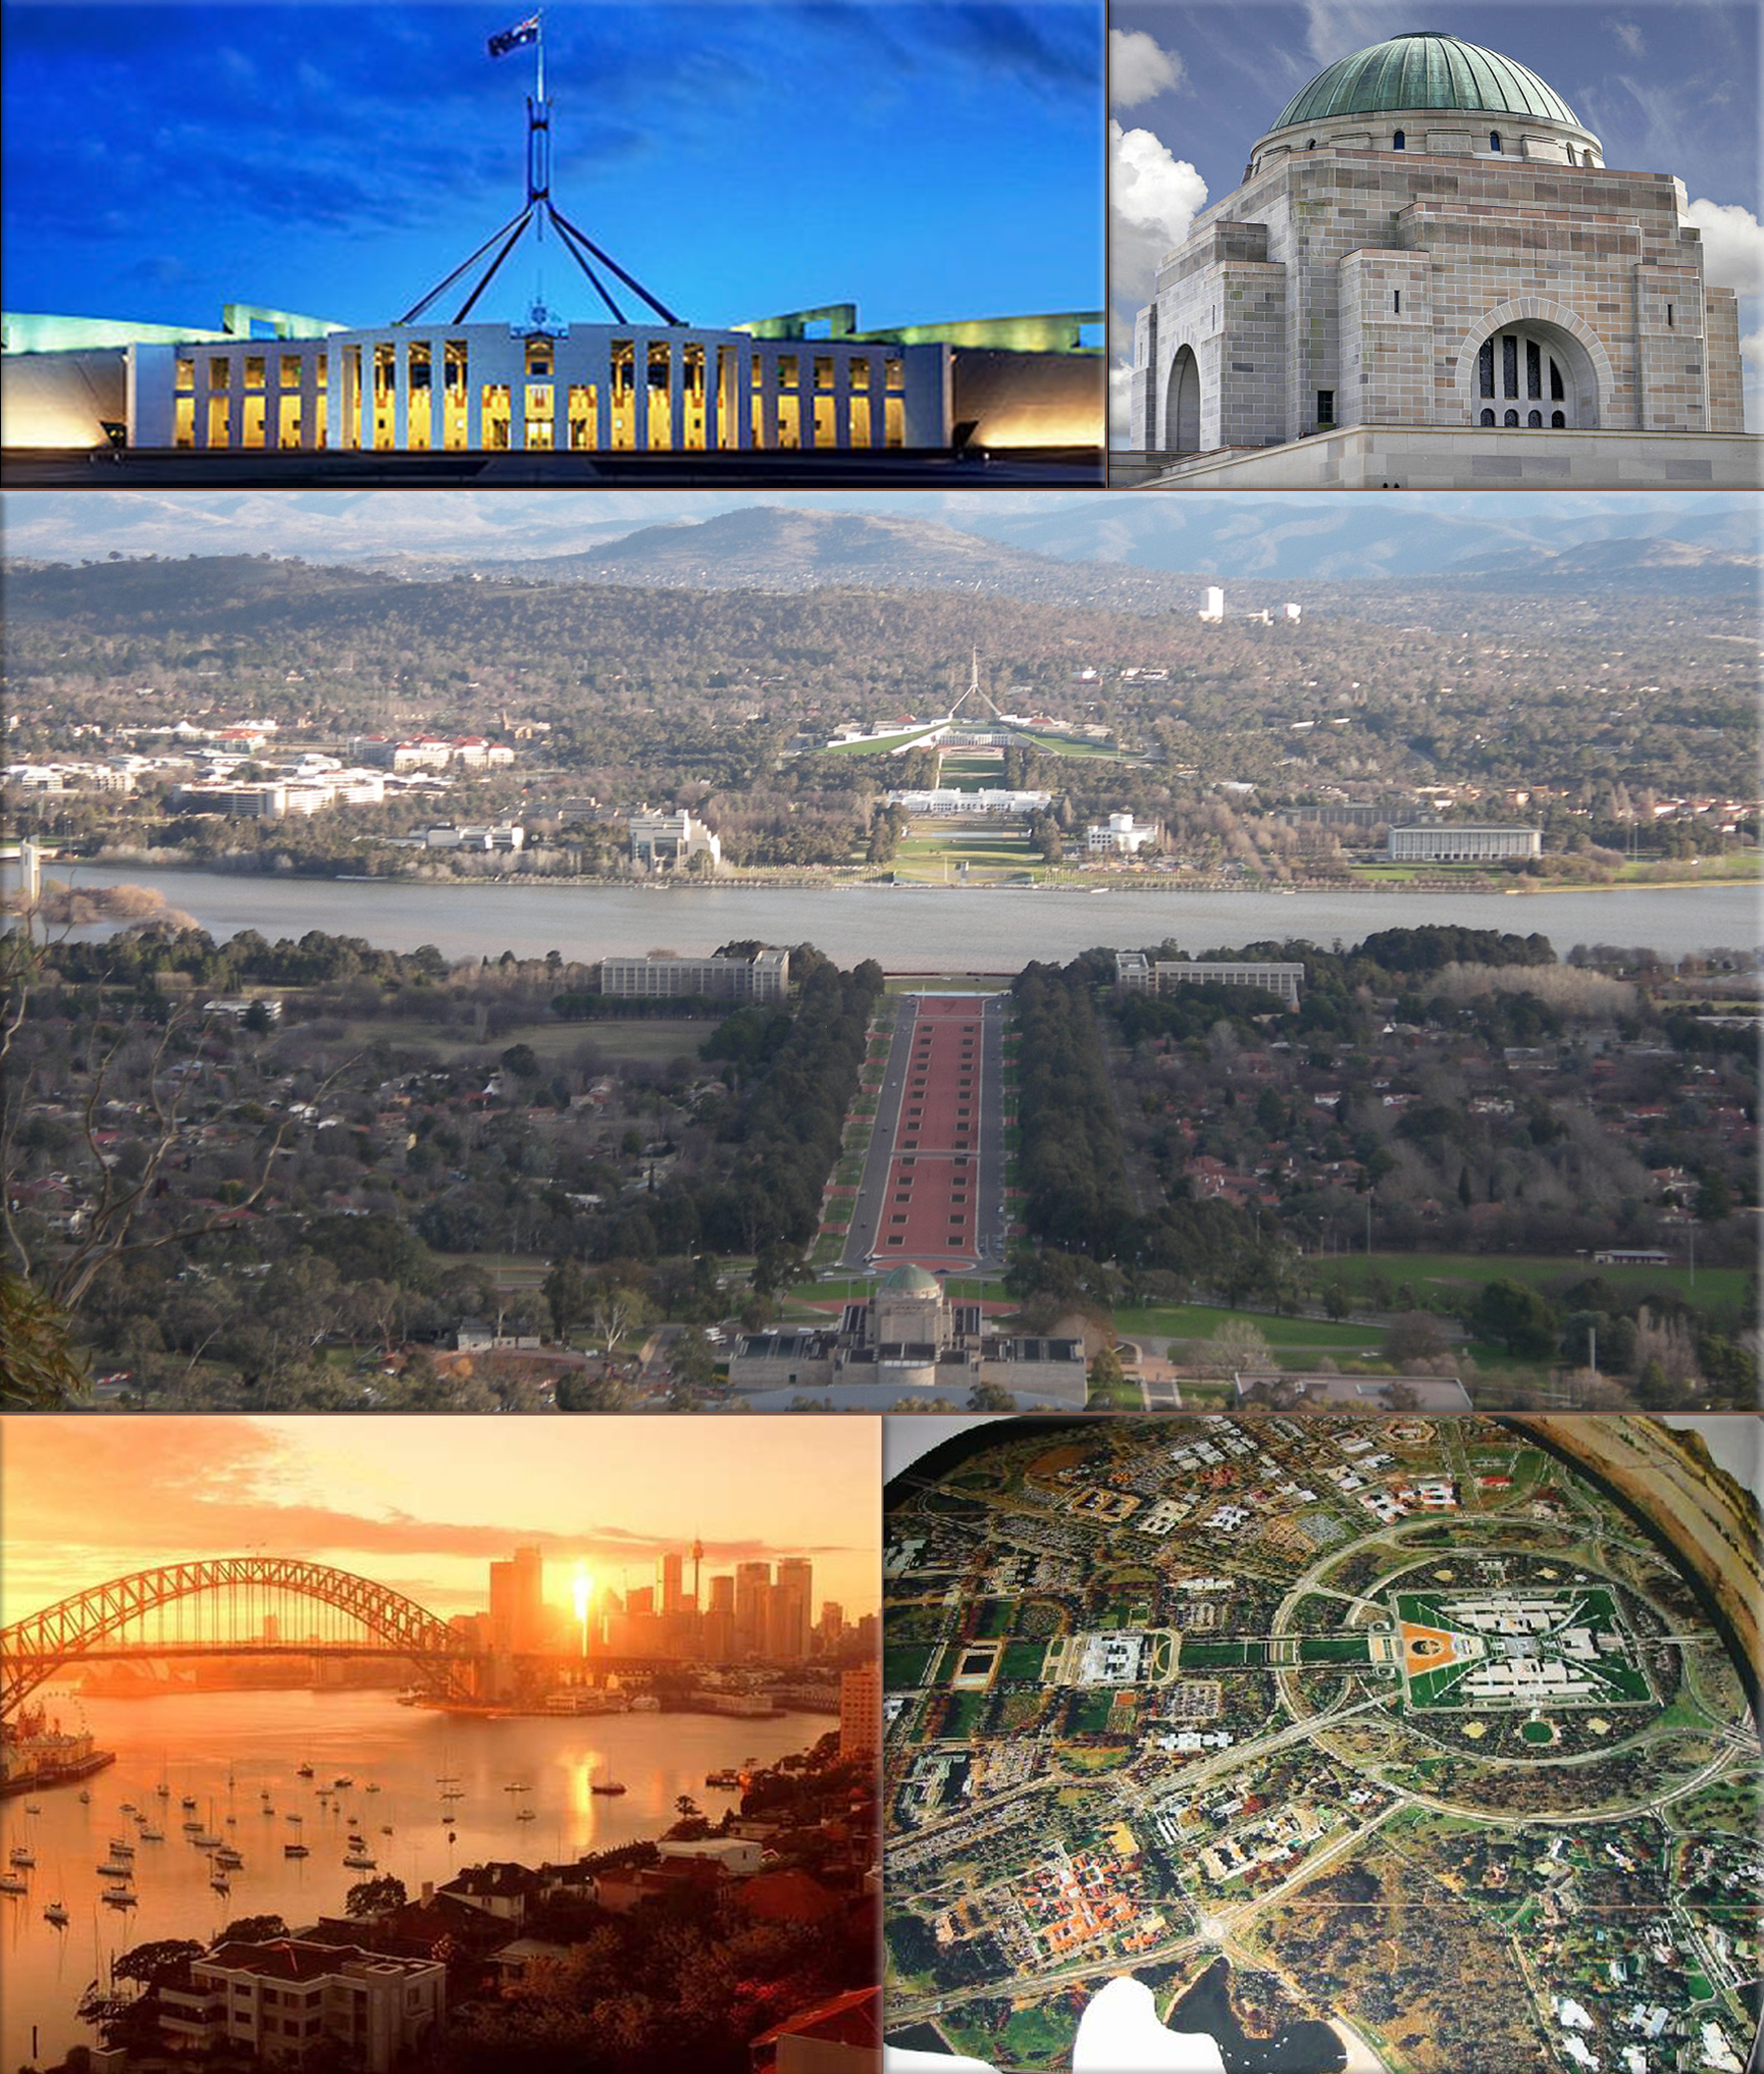 Canberra was selected for the location of the Australia's capital in 1908 as a compromise between rivals Sydney and Melbourne, Australia's two largest cities